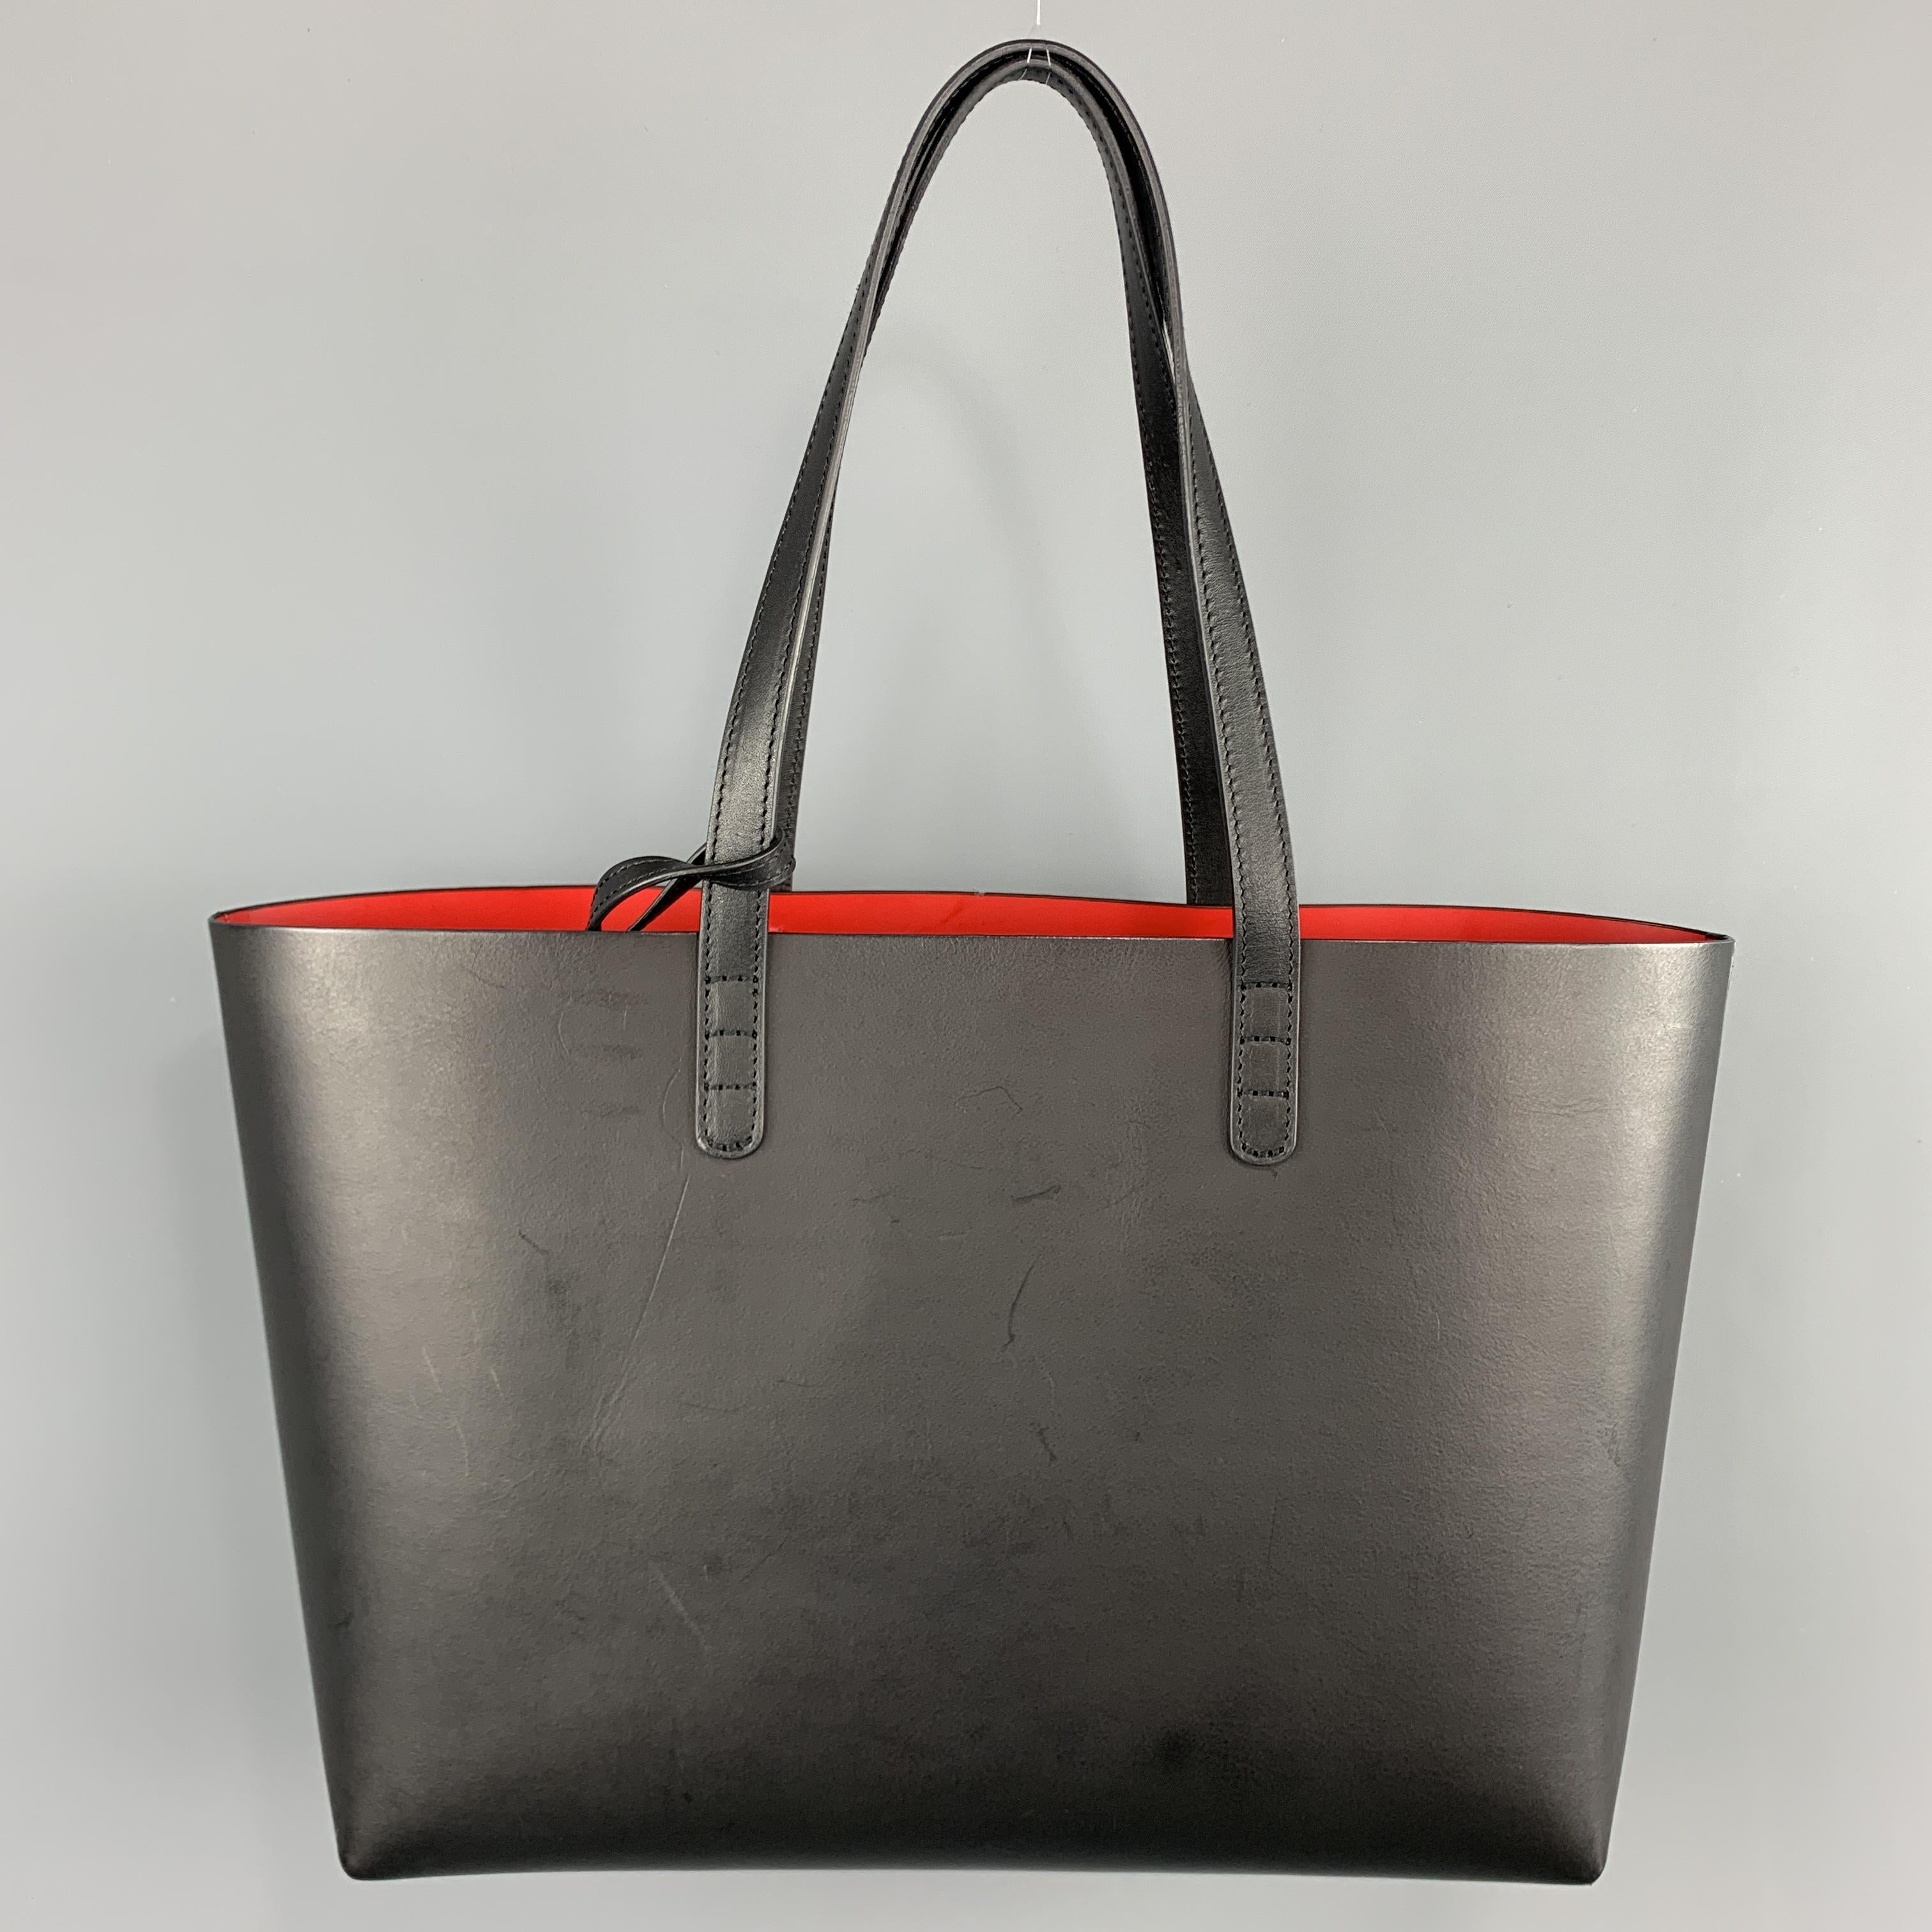 black tote with red interior